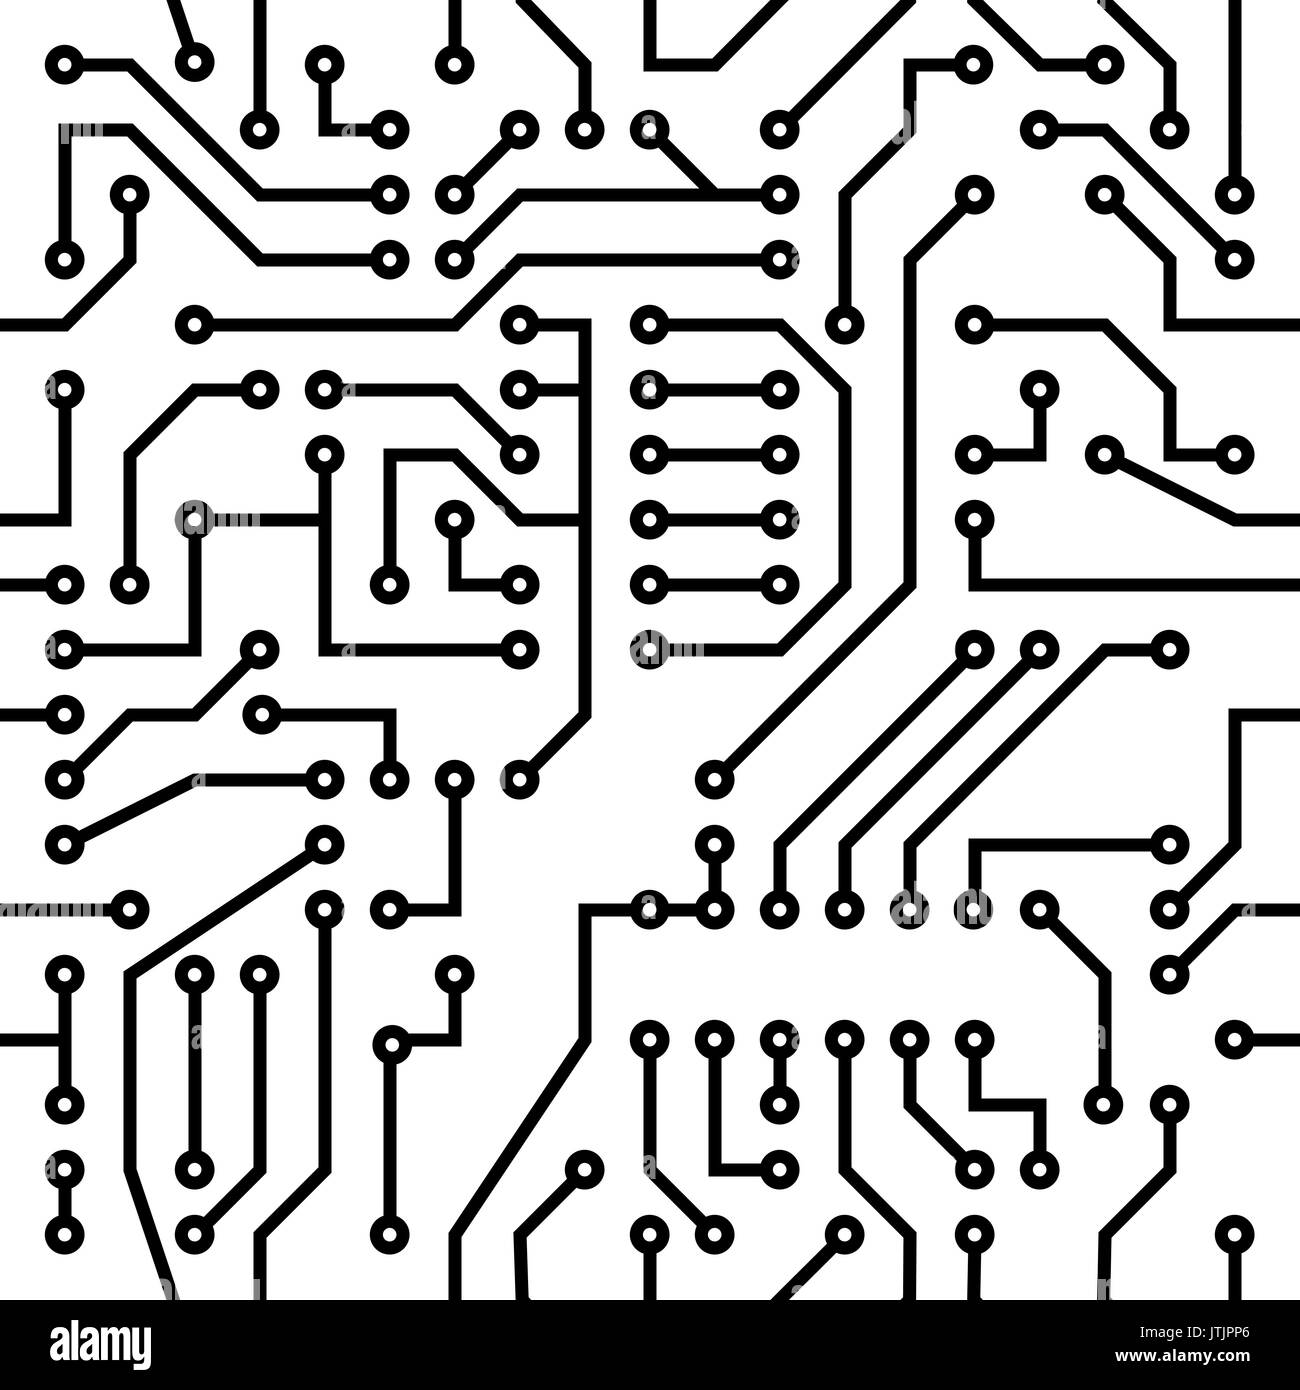 Seamless texture of a printed circuit board Stock Vector